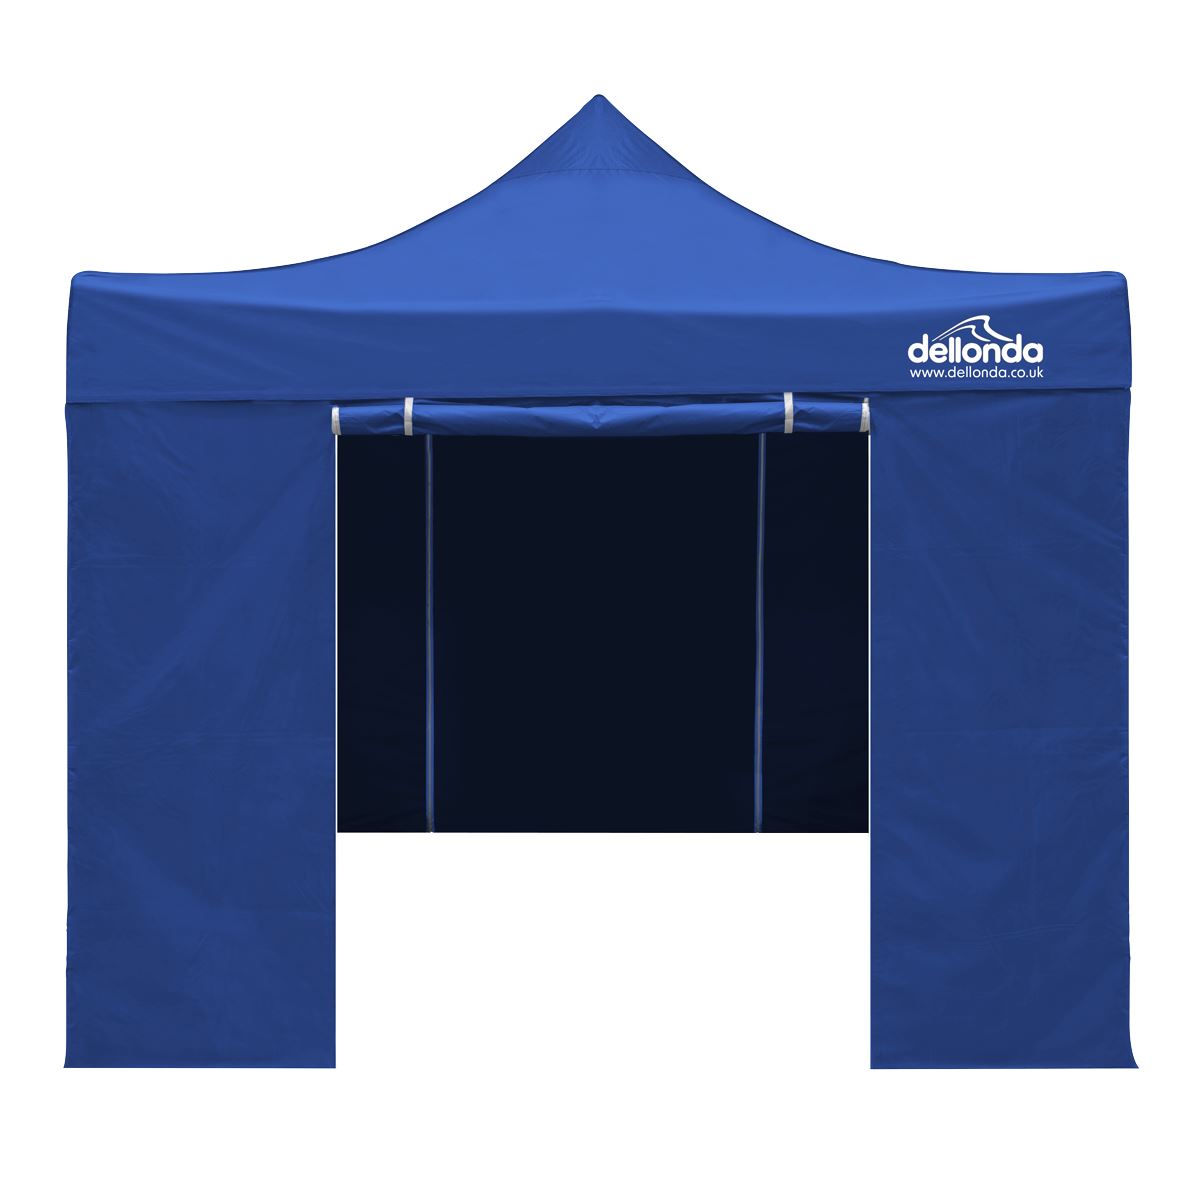 Dellonda Premium 3x3m Pop-Up Gazebo & Side Walls, PVC Coated, Water Resistant Fabric with Carry Bag, Rope, Stakes & Weight Bags - Blue